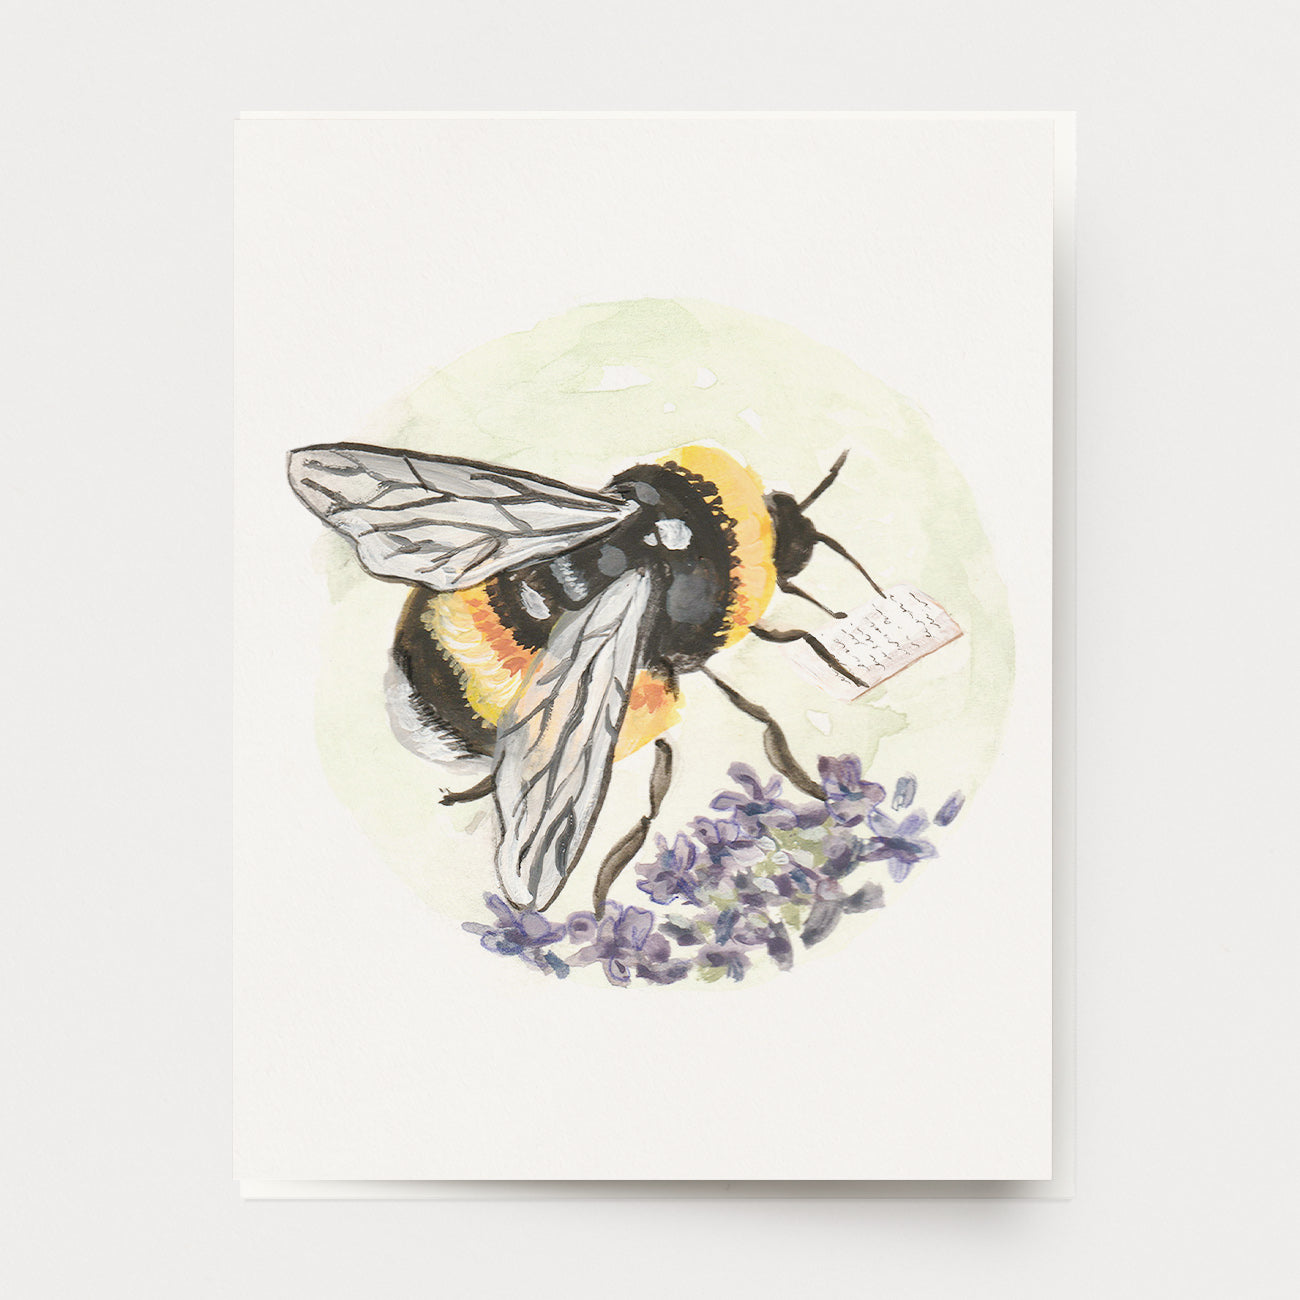 A penpal greeting card of a honey bee on lavender flowers, reading a letter from a friend. Painted in colorful watercolor paint, in the style of Beatrix Potter, by Mendocino Coast artist Katherine Lewis. Made by Ingrid Press card and gift company, ethically printed in the USA.